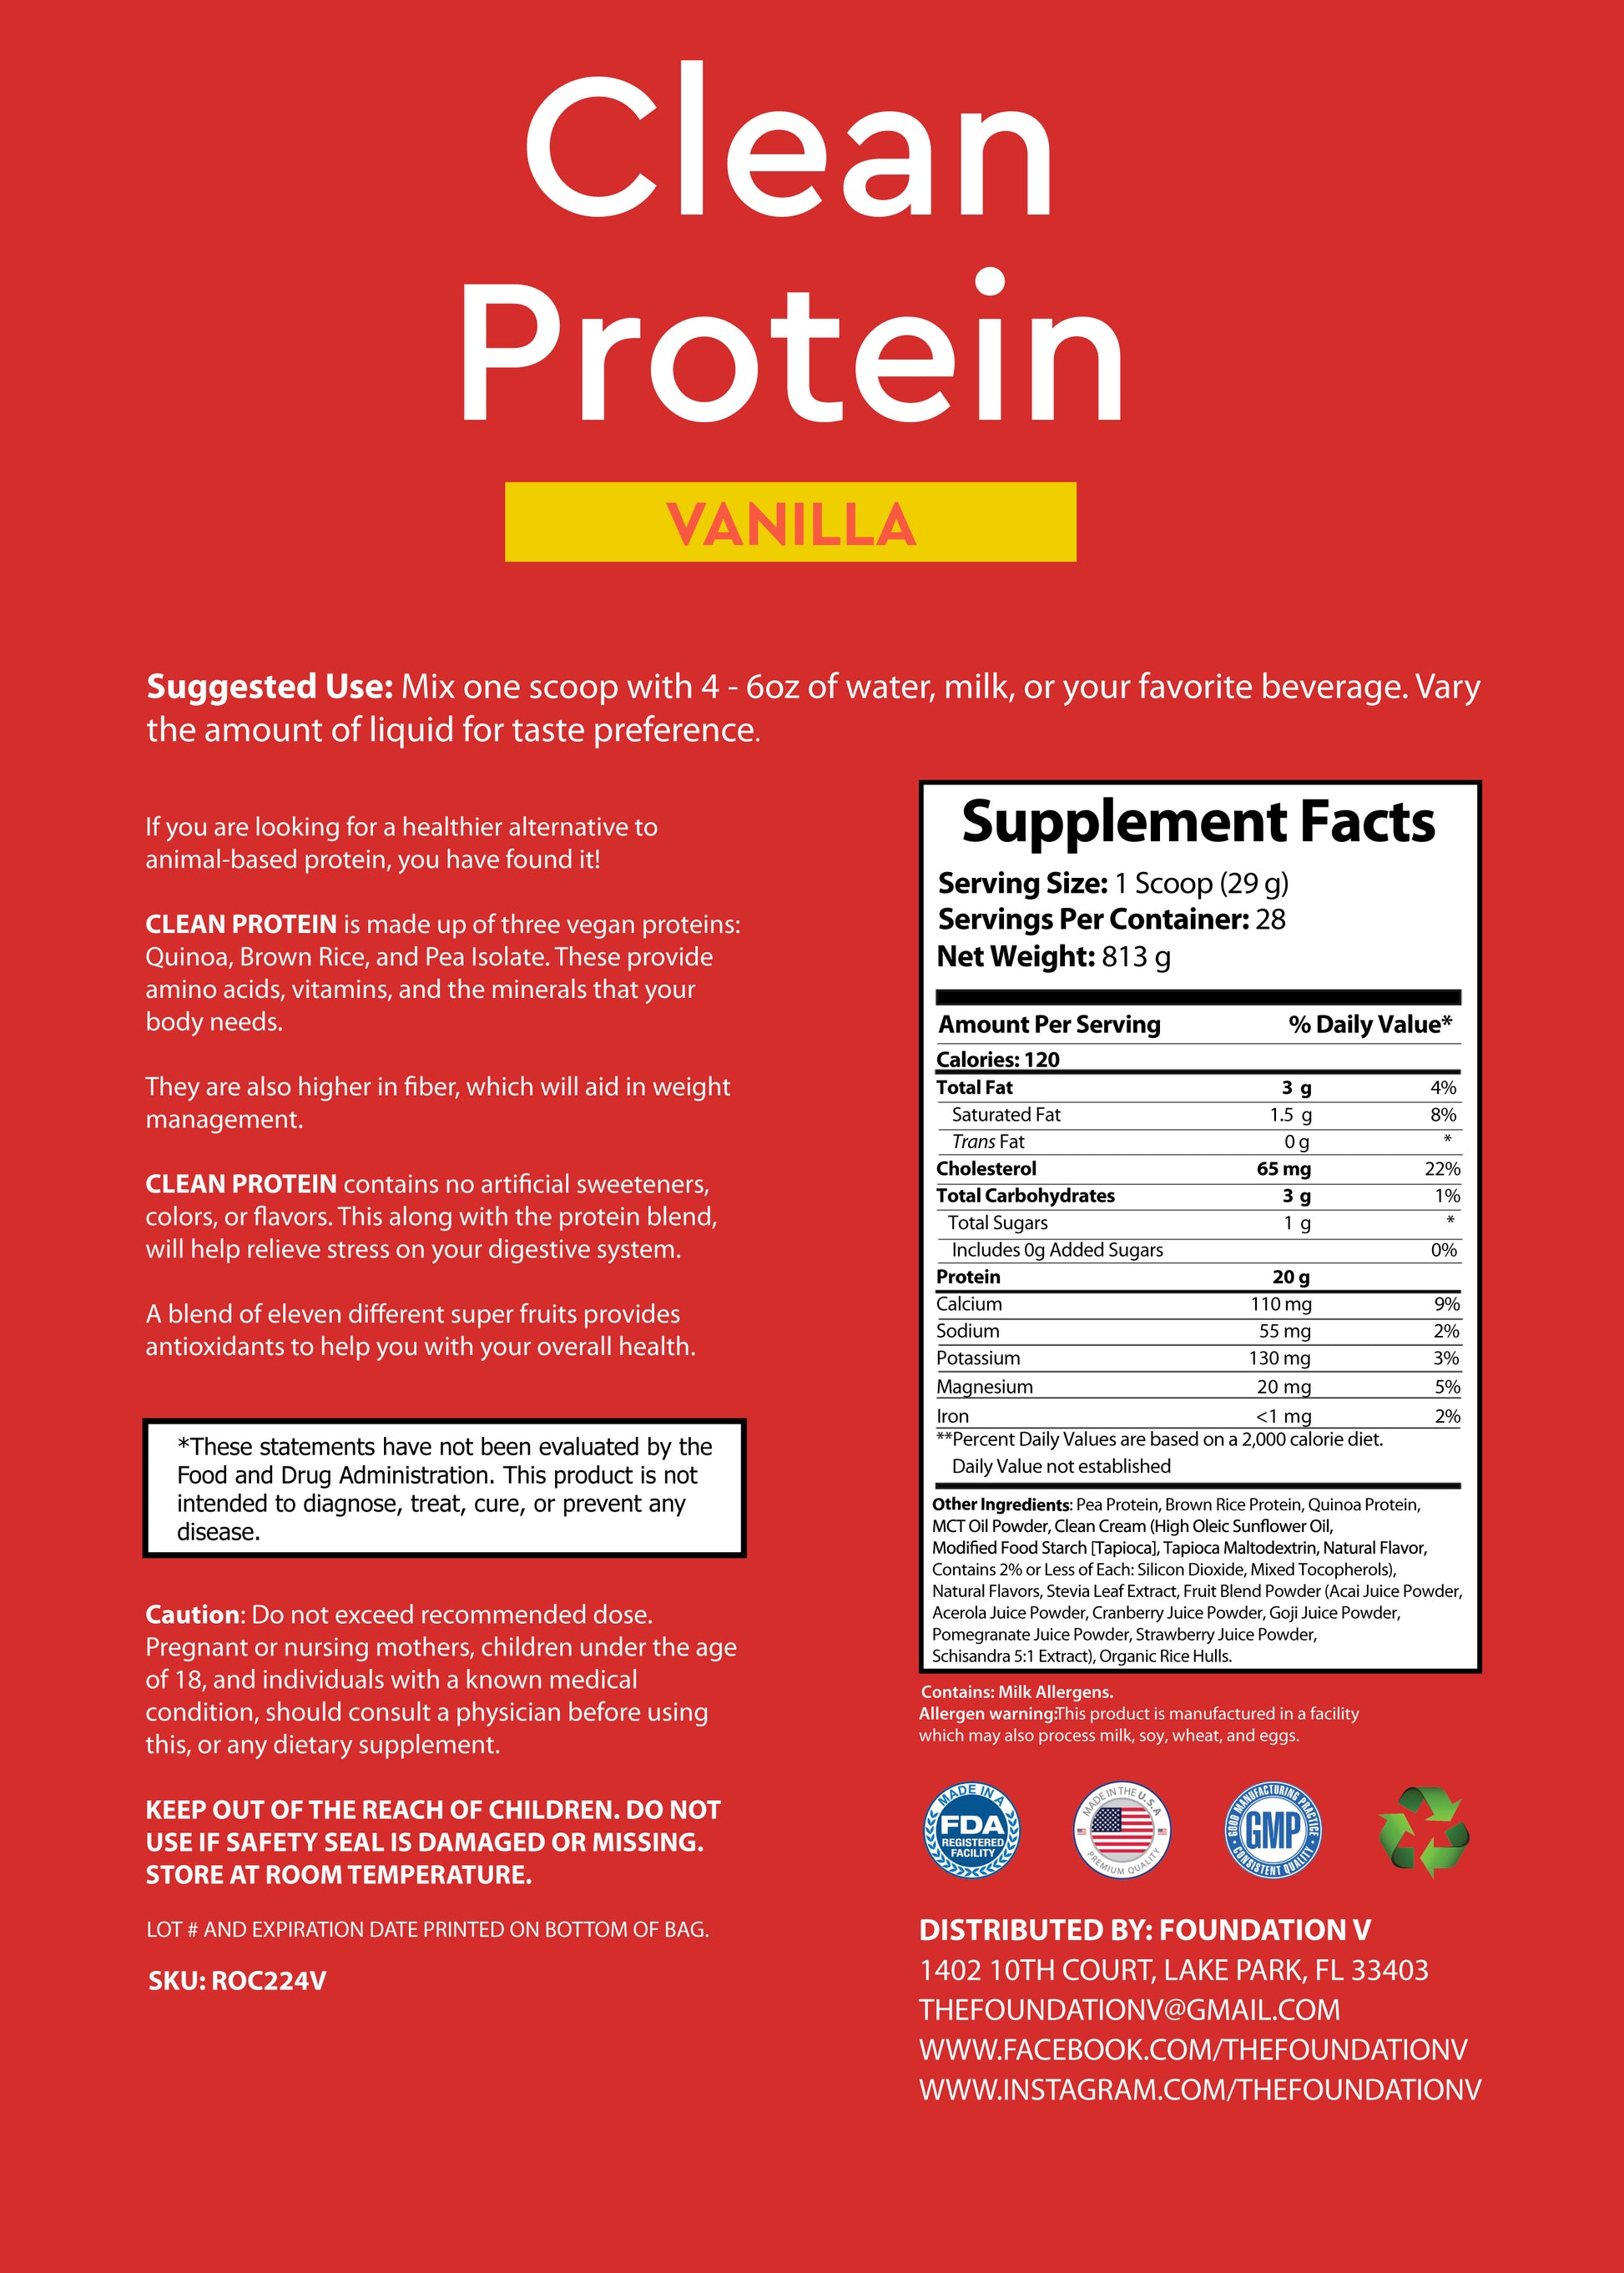 clean protein allows you to recieve 11 super fruit antioxidants not only to boost your overall health, skin, and body, but is paired with protein you can take daily. This is in the vanilla flavor and is packed with 20 grams of protein in each scoop. Foundation V supplements are the way to go when it comes to quality. No artificial sweeteners or artificial flavors.